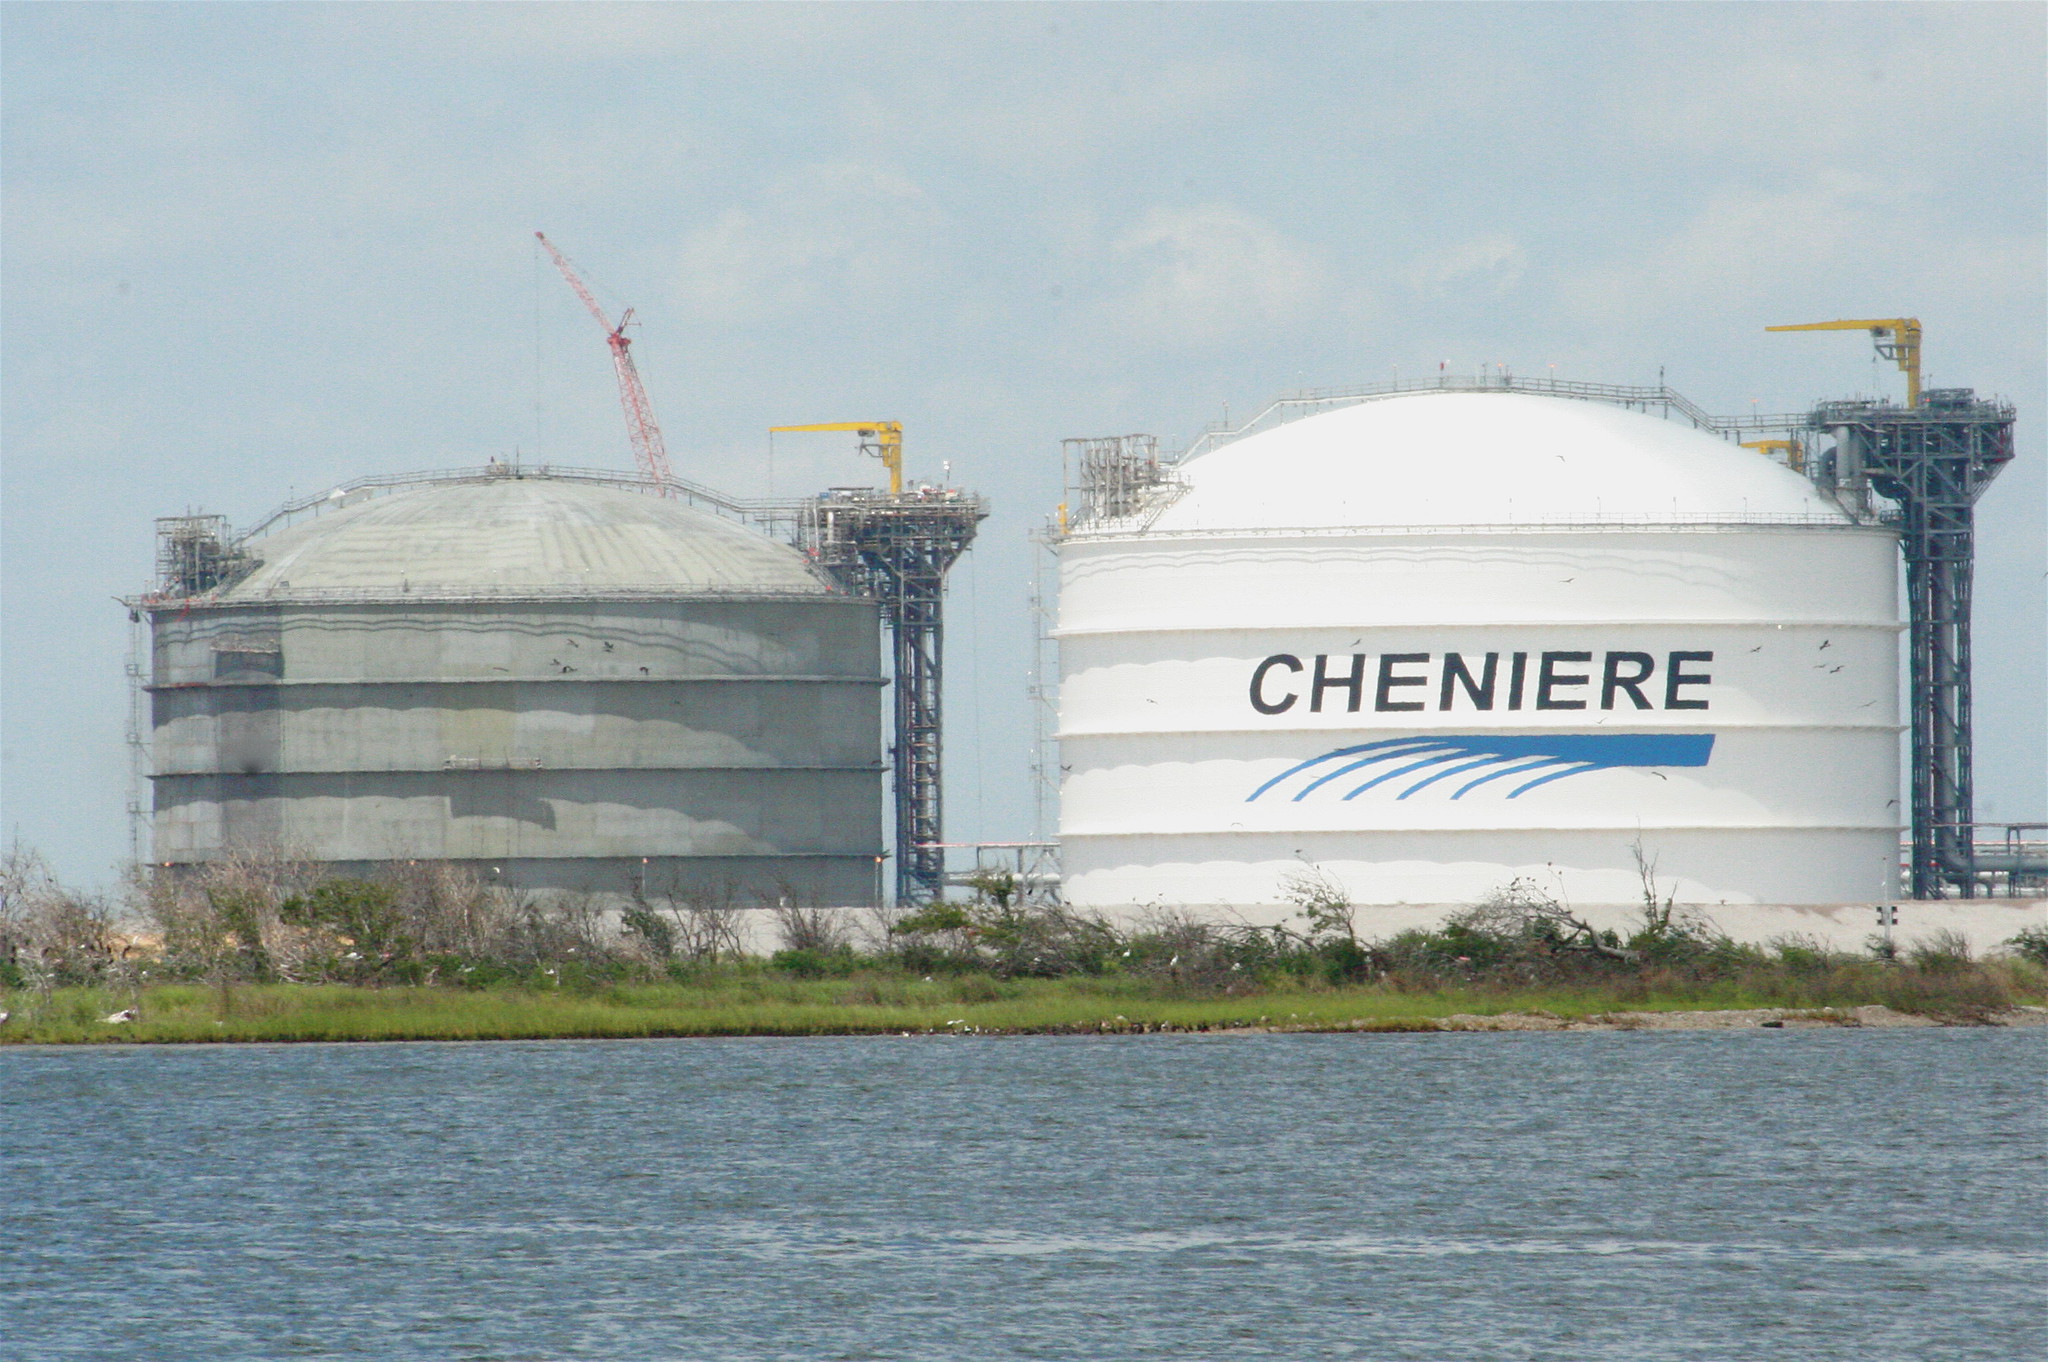 Sabine Pass LNG import terminal under construction in 2009